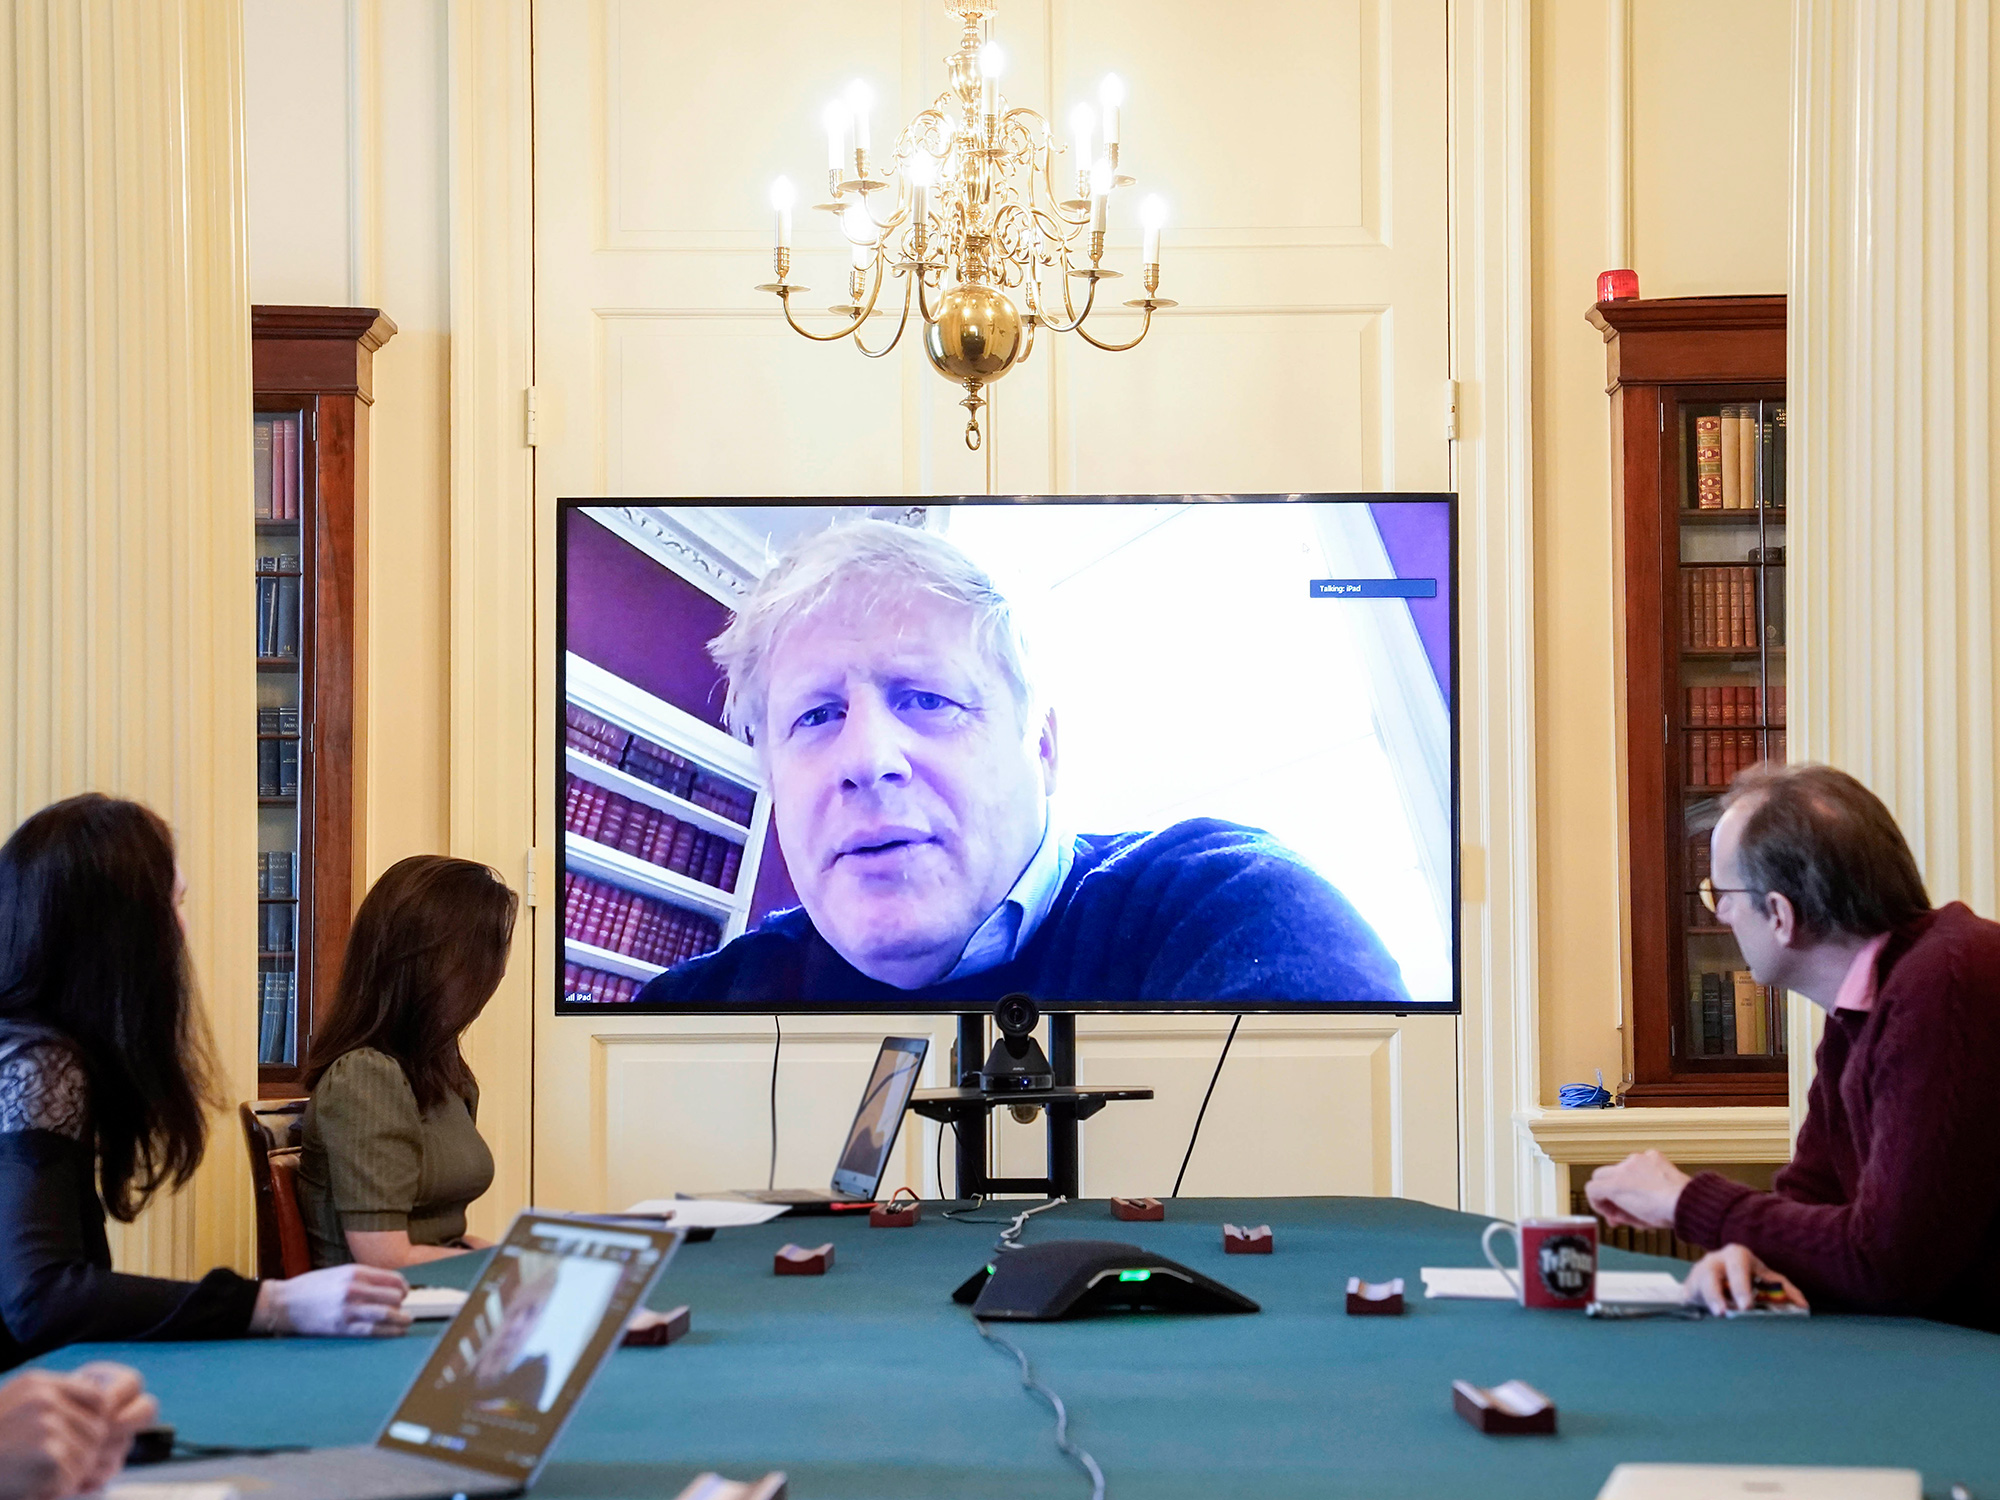 Boris Johnson chairs a Covid-19 response meeting remotely, in London, on March 28.